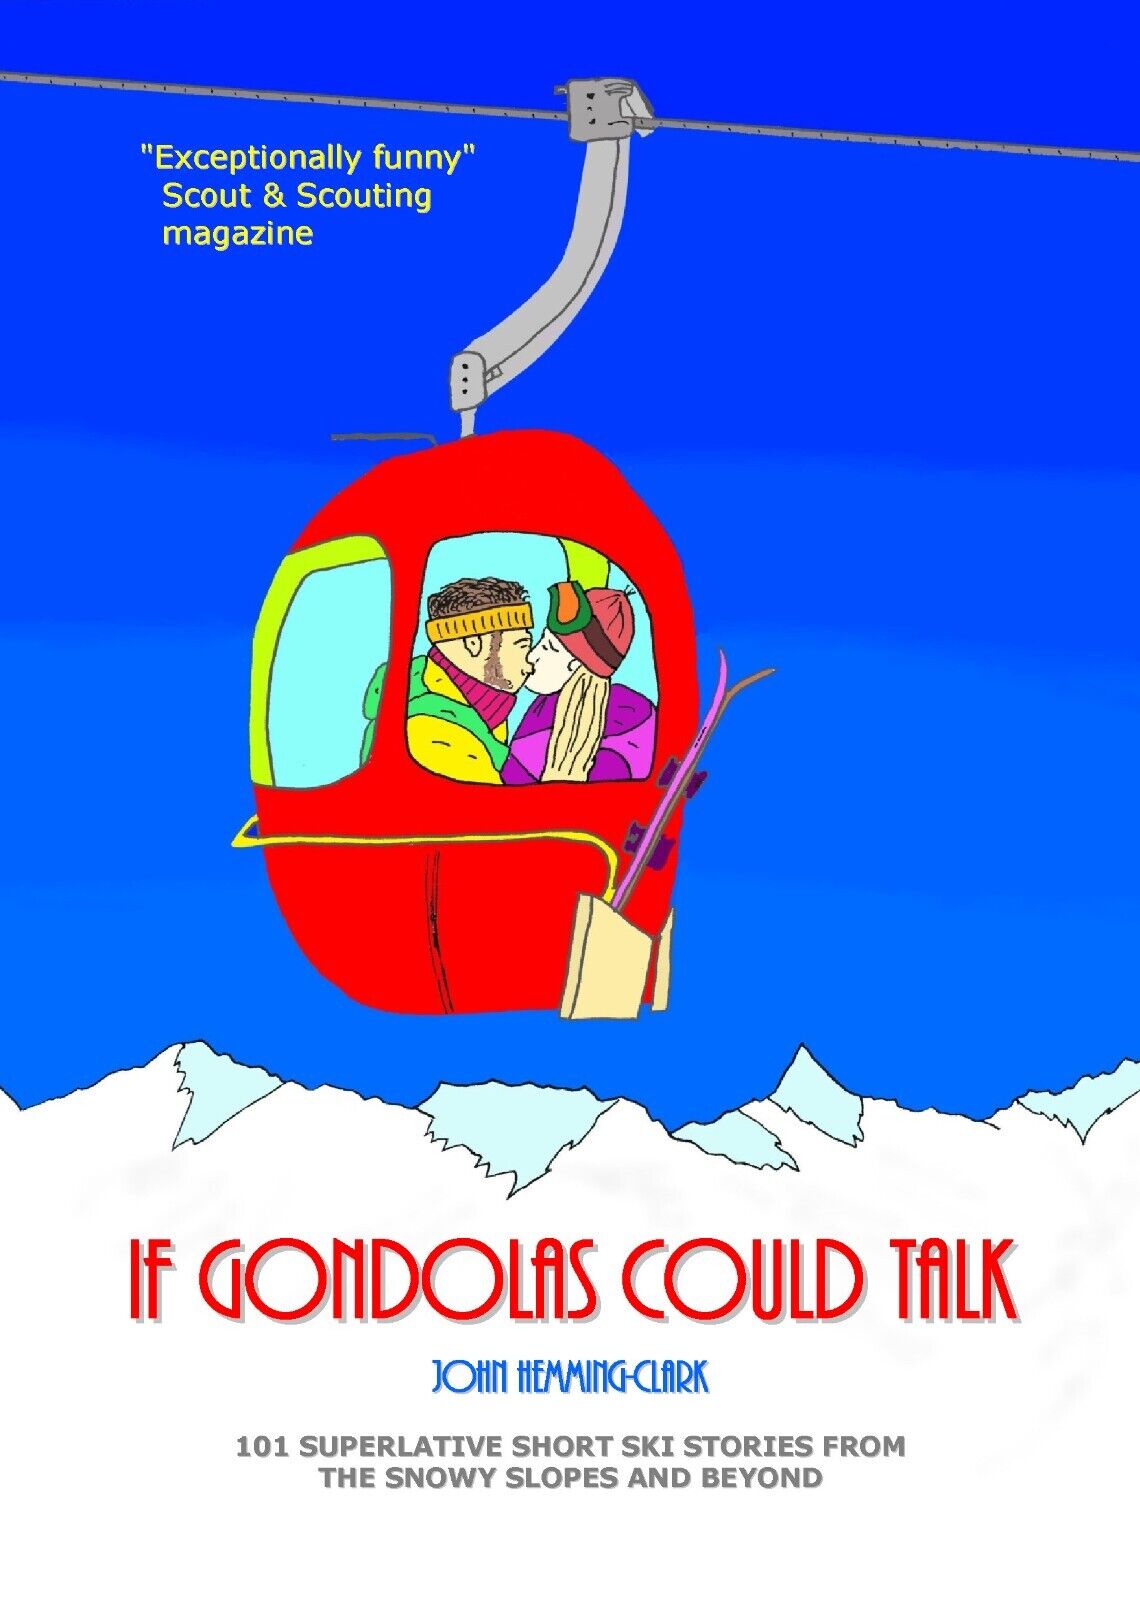 Book cover showing a red gondola with a couple inside kissing, above a snow capped mountain and blue sky